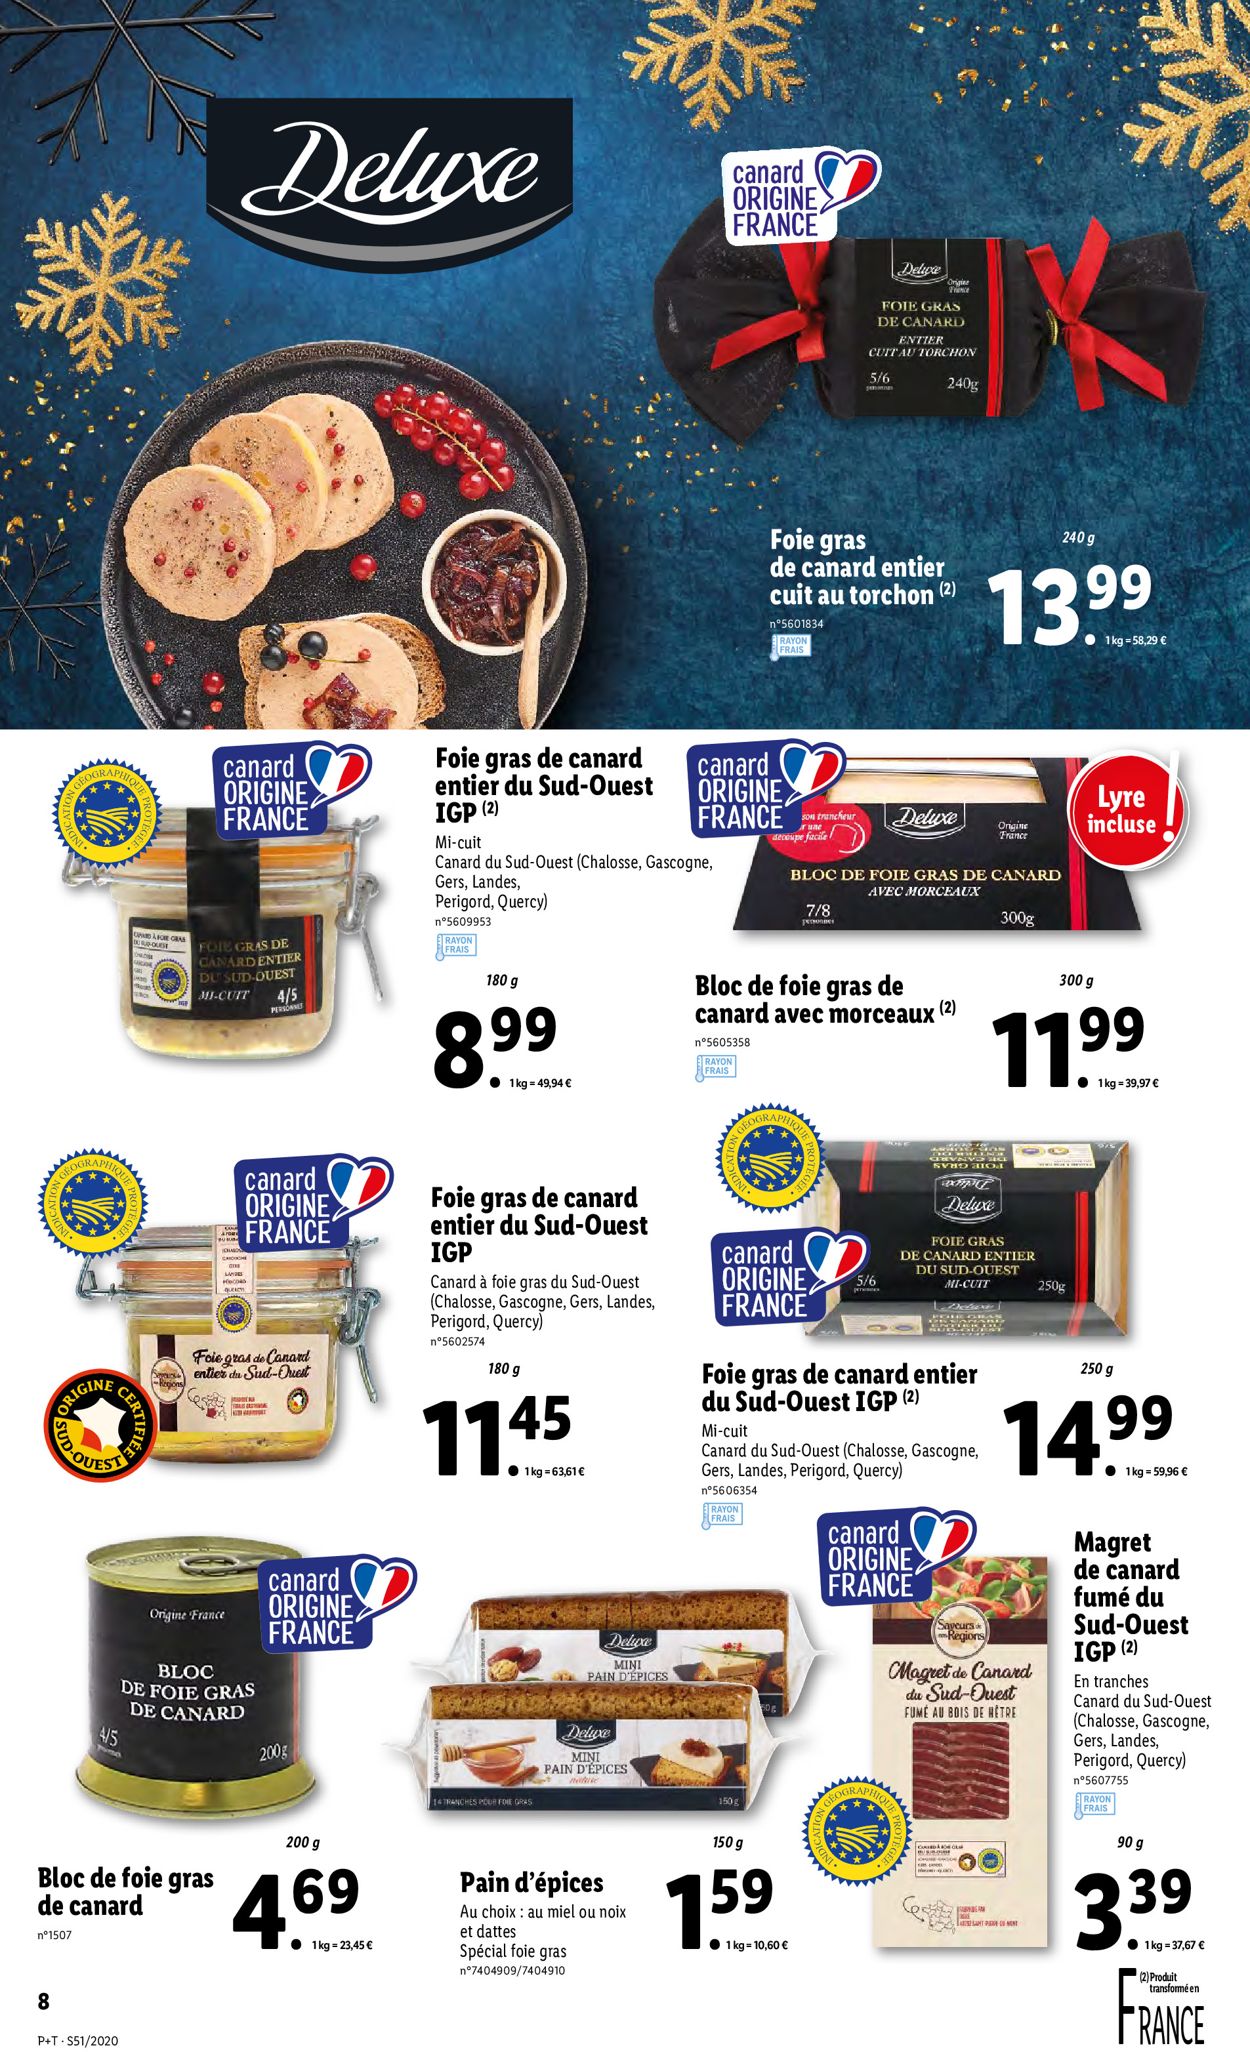 Lidl Catalogue - 16.12-22.12.2020 (Page 8)